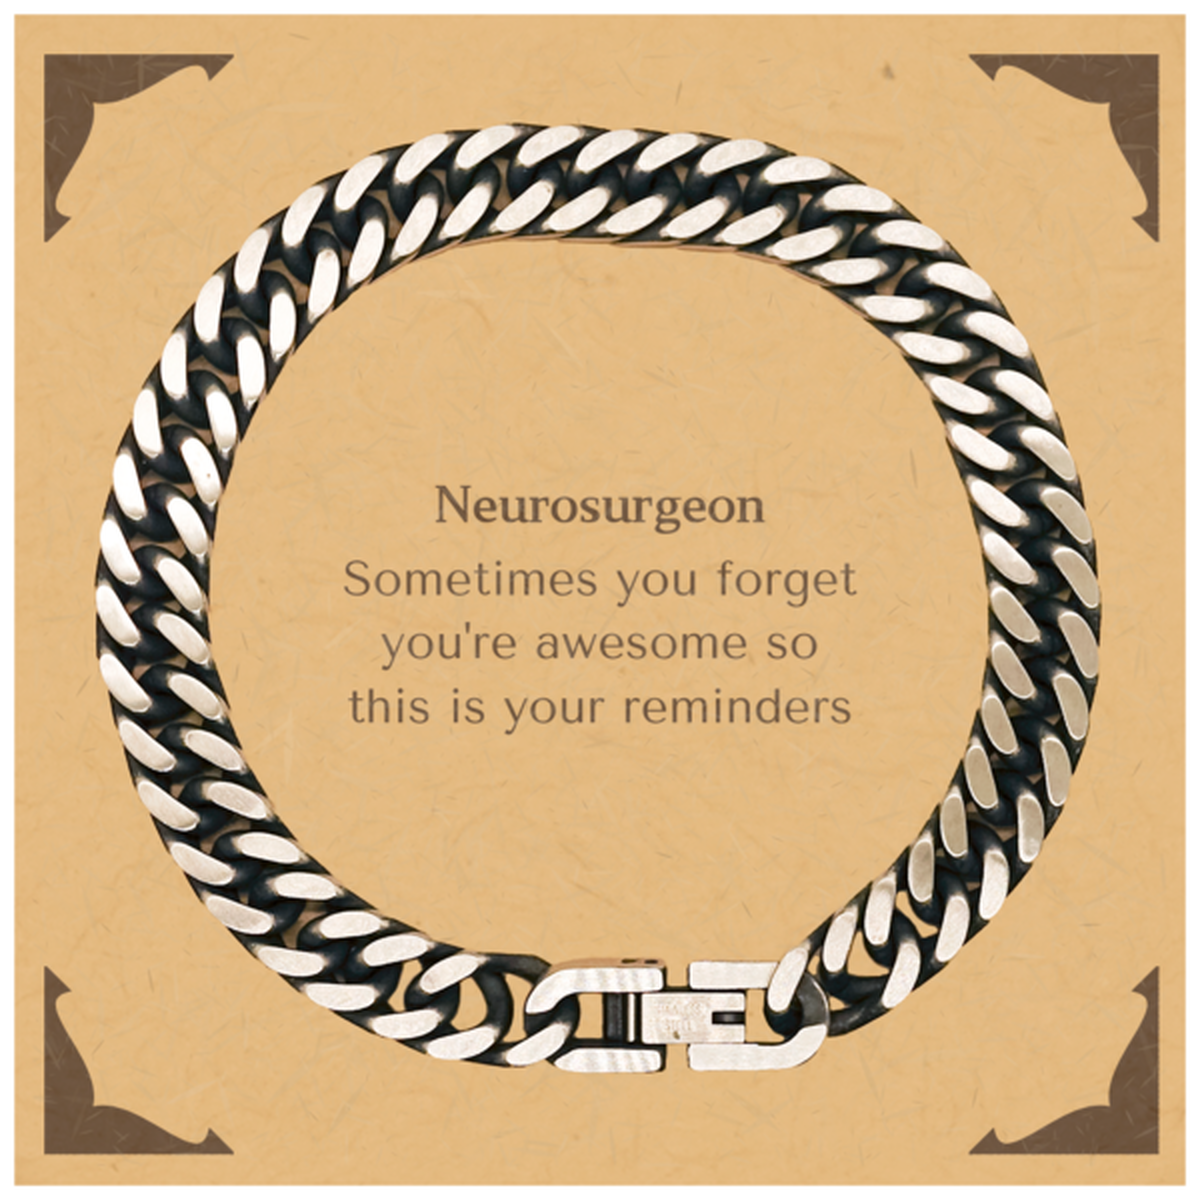 Sentimental Neurosurgeon Cuban Link Chain Bracelet, Neurosurgeon Sometimes you forget you're awesome so this is your reminders, Graduation Christmas Birthday Gifts for Neurosurgeon, Men, Women, Coworkers